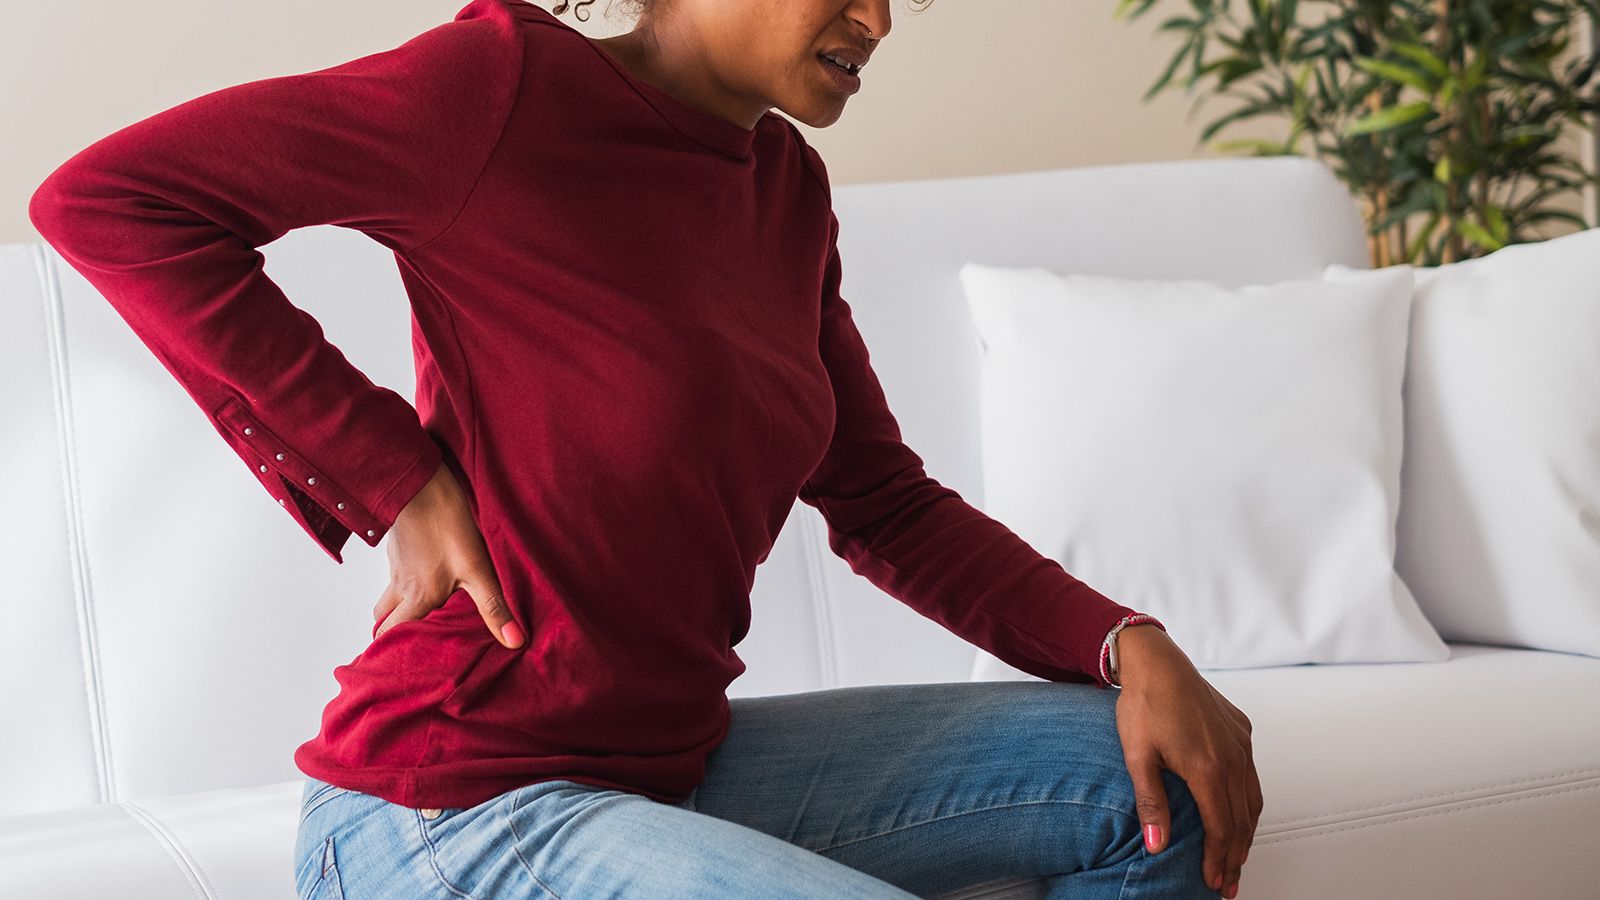 Best medications for low back pain, according to new research